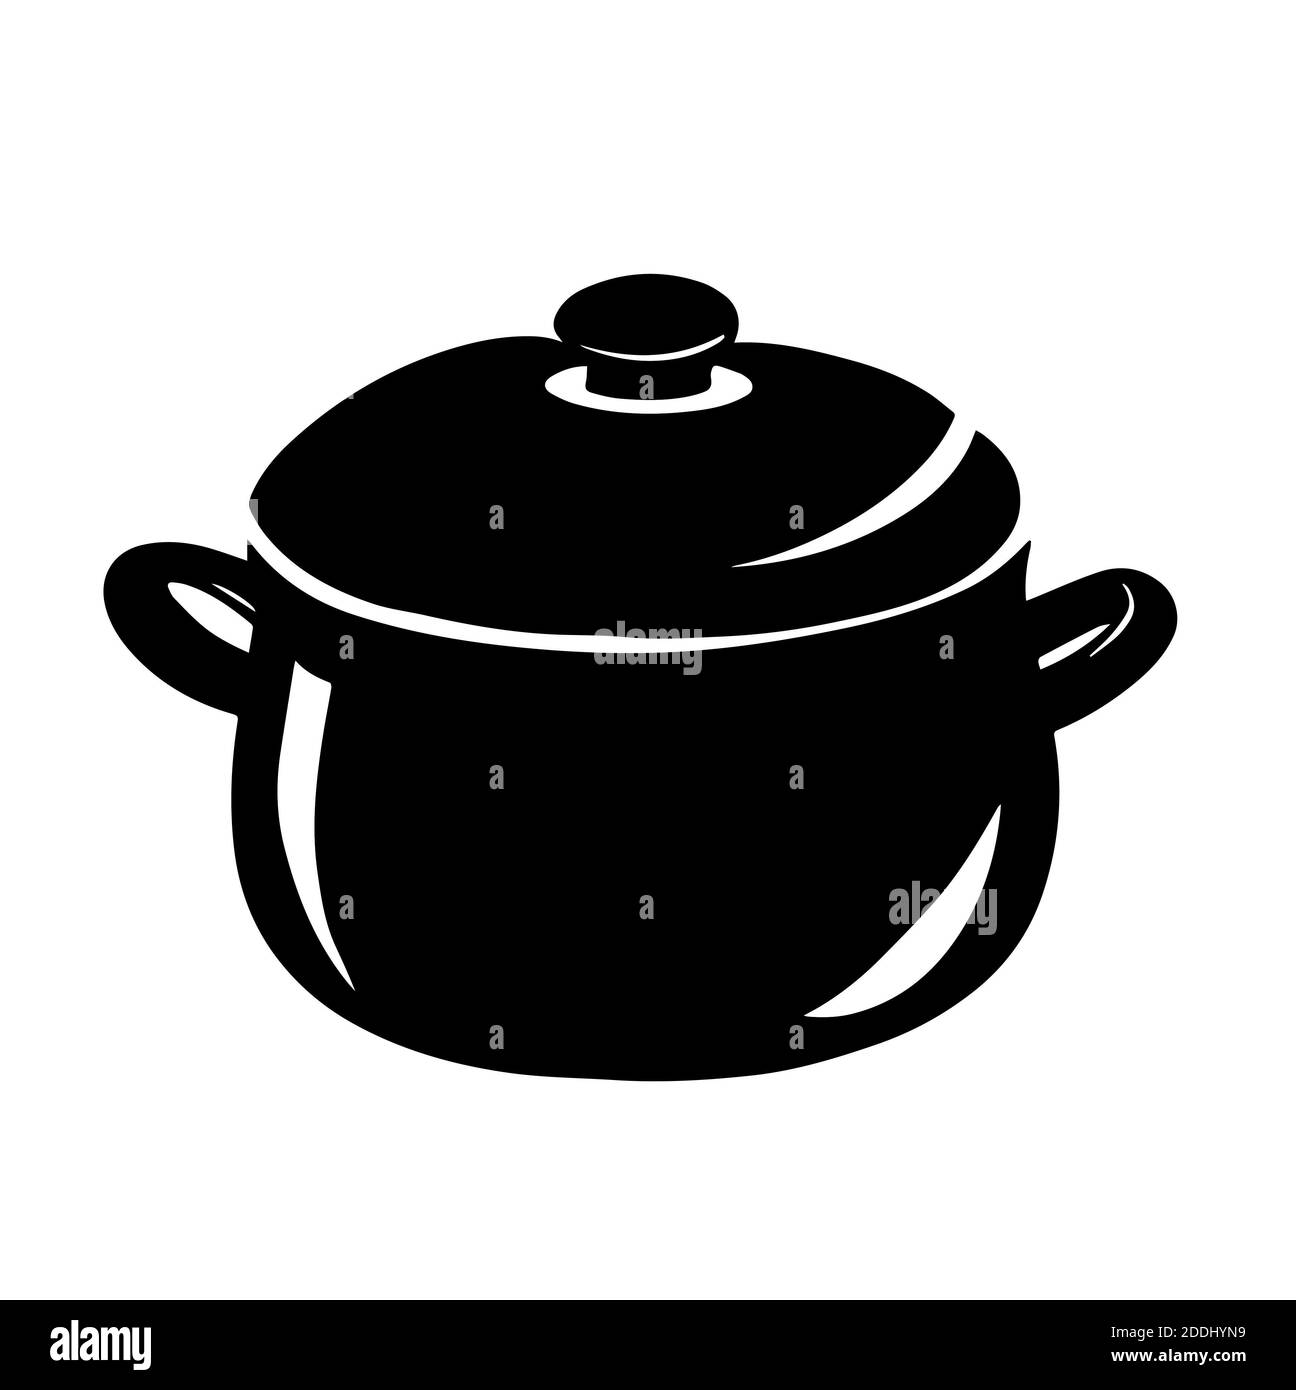 Cooking pan vector icon. Pan black silhouette on white background Stock Photo